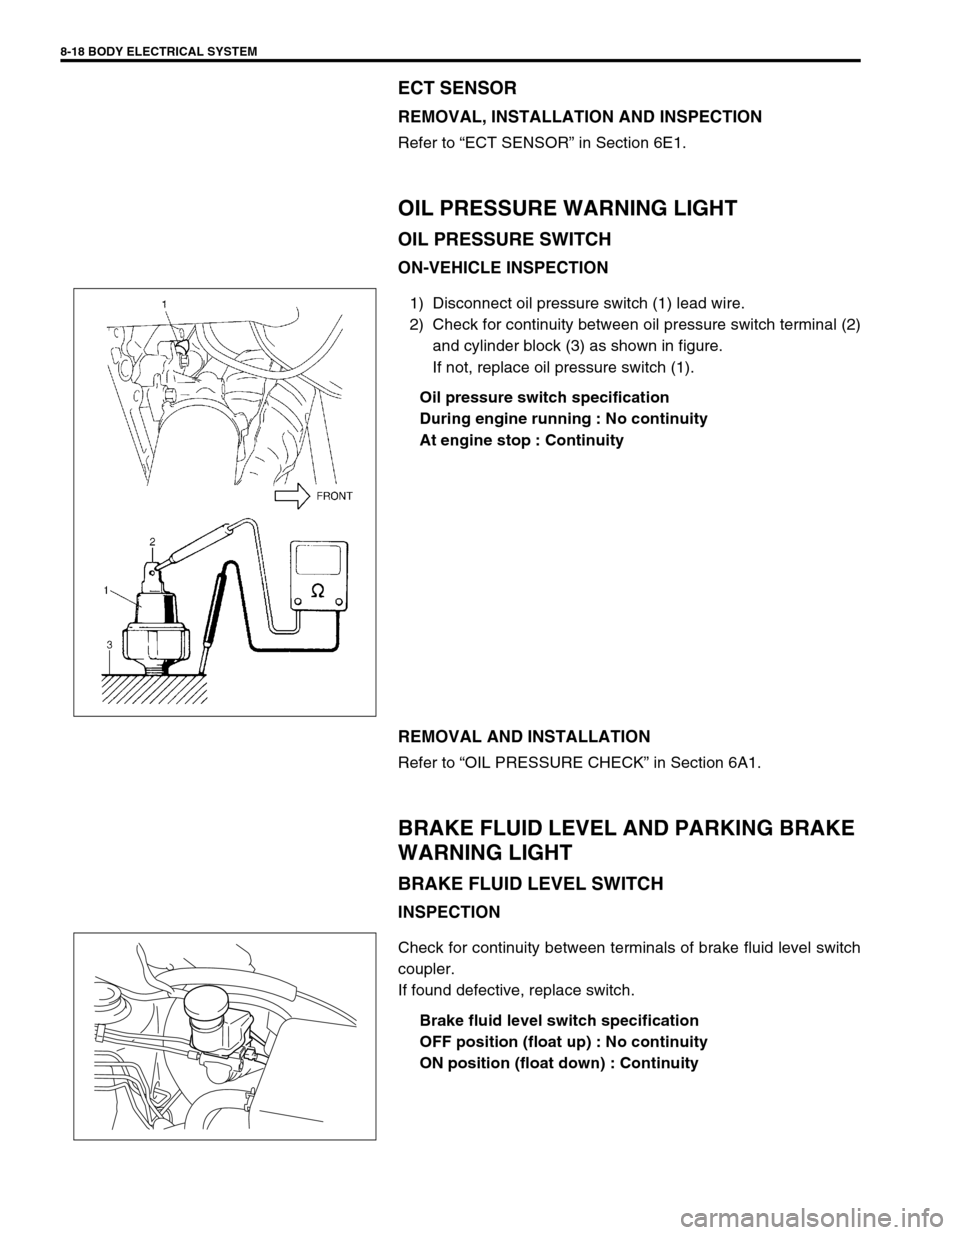 SUZUKI SWIFT 2000 1.G Transmission Service Workshop Manual 8-18 BODY ELECTRICAL SYSTEM
ECT SENSOR
REMOVAL, INSTALLATION AND INSPECTION
Refer to “ECT SENSOR” in Section 6E1.
OIL PRESSURE WARNING LIGHT
OIL PRESSURE SWITCH
ON-VEHICLE INSPECTION
1) Disconnect